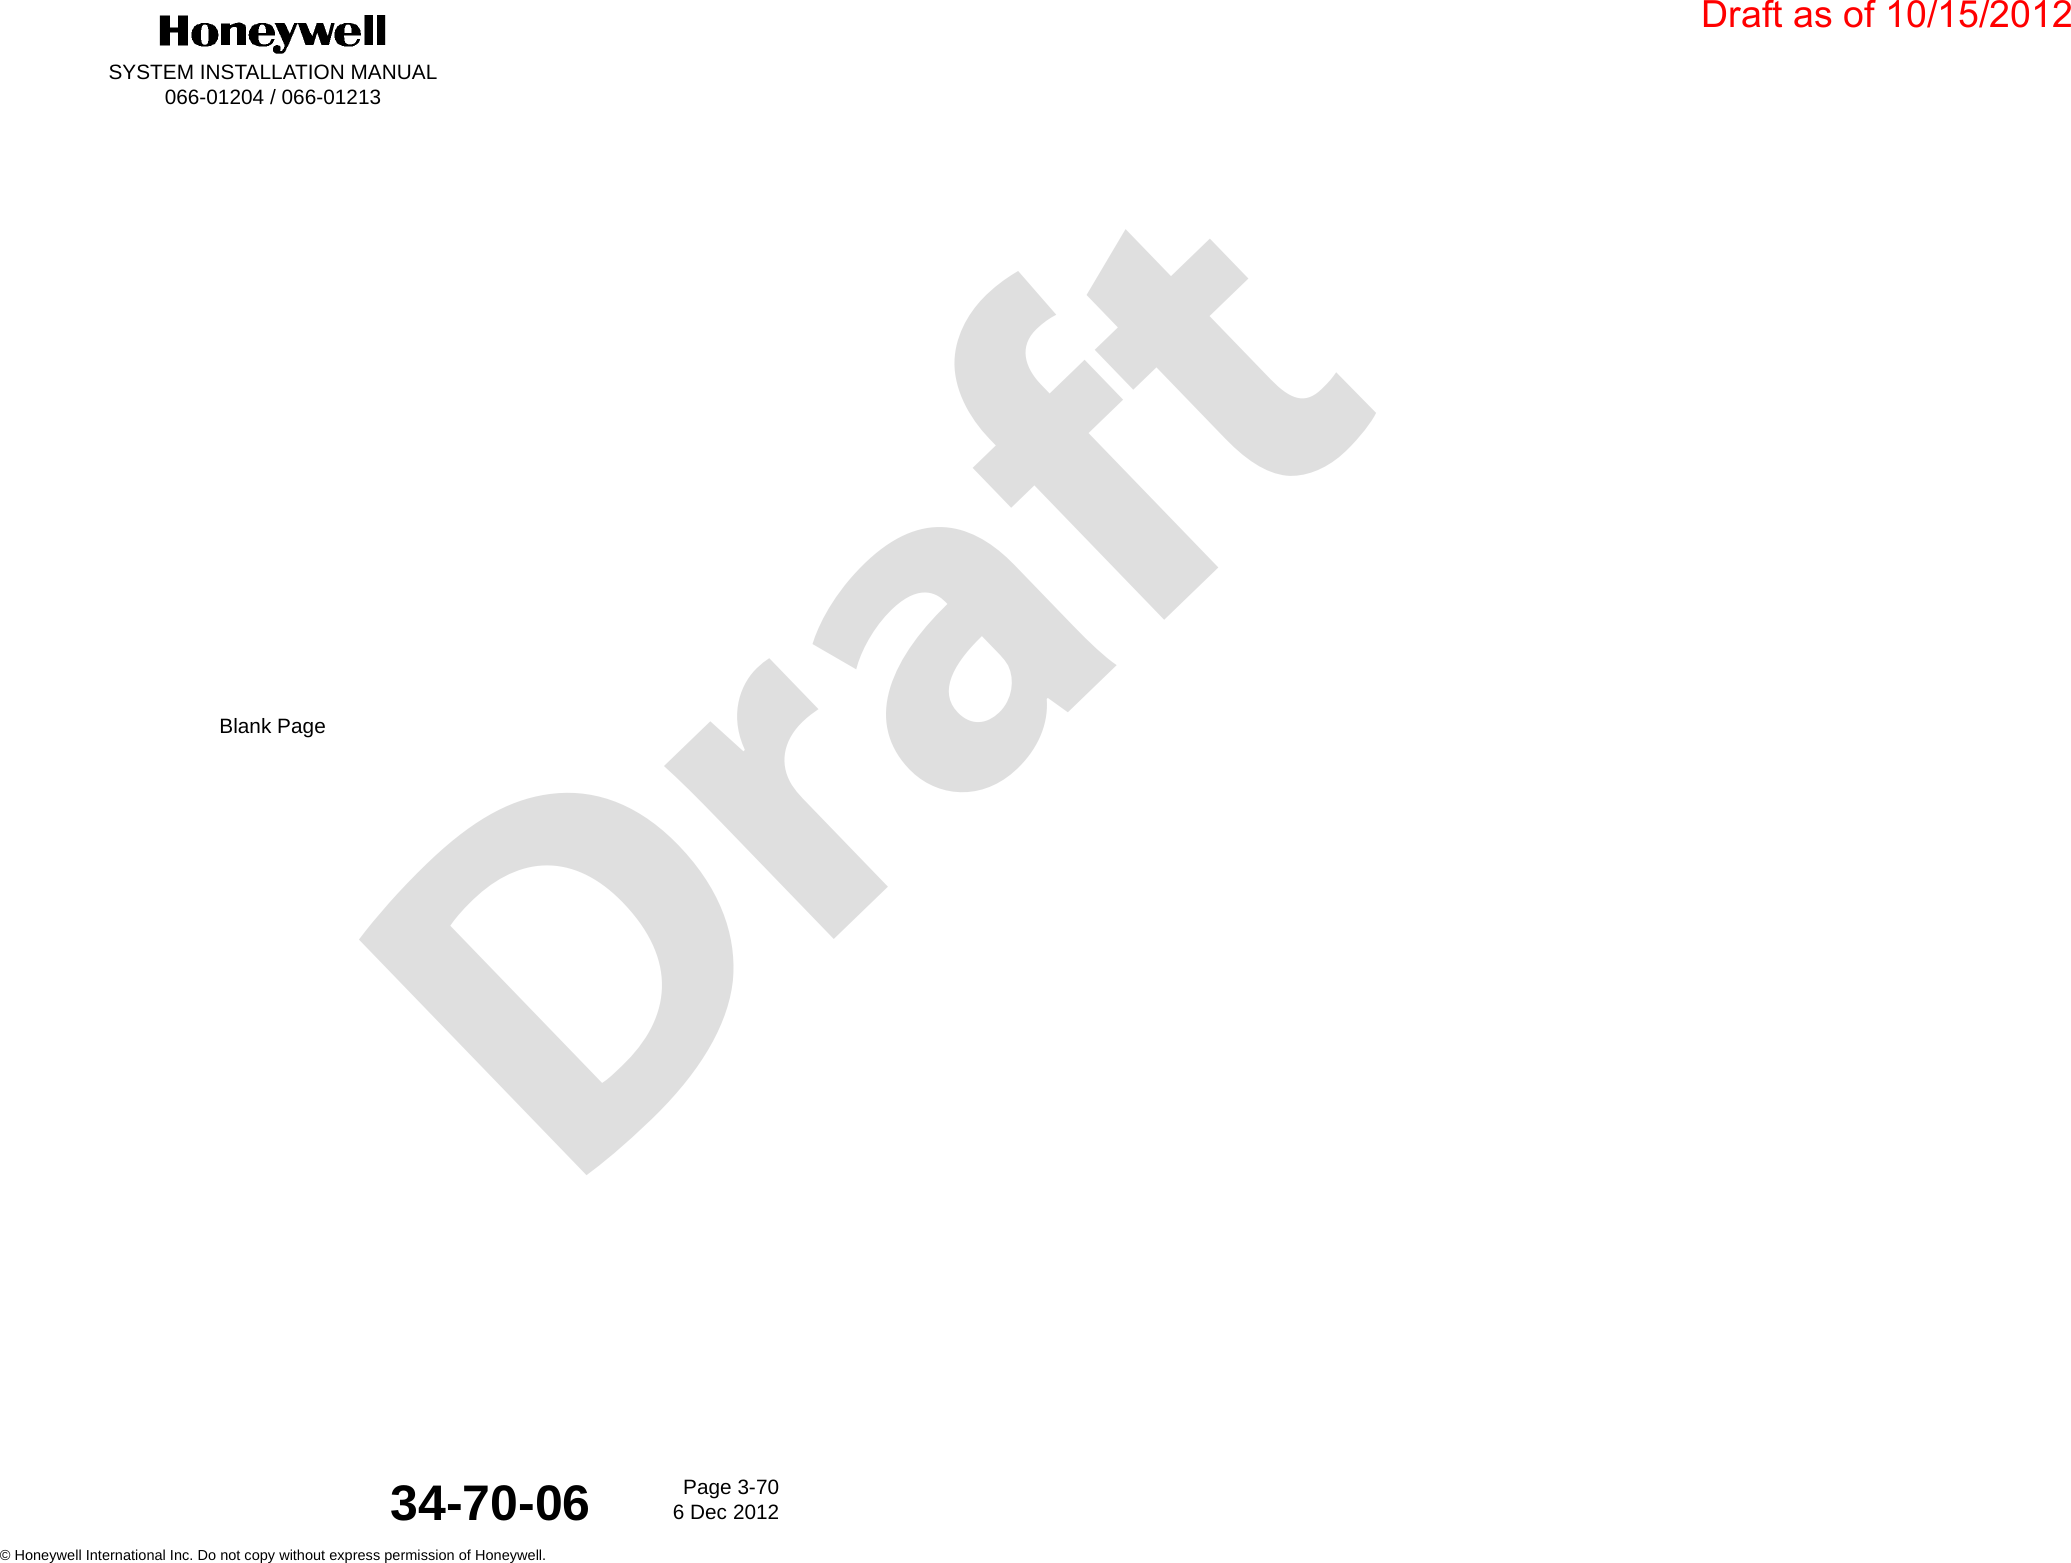 DraftSYSTEM INSTALLATION MANUAL066-01204 / 066-01213Page 3-706 Dec 2012© Honeywell International Inc. Do not copy without express permission of Honeywell.34-70-06Blank PageDraft as of 10/15/2012